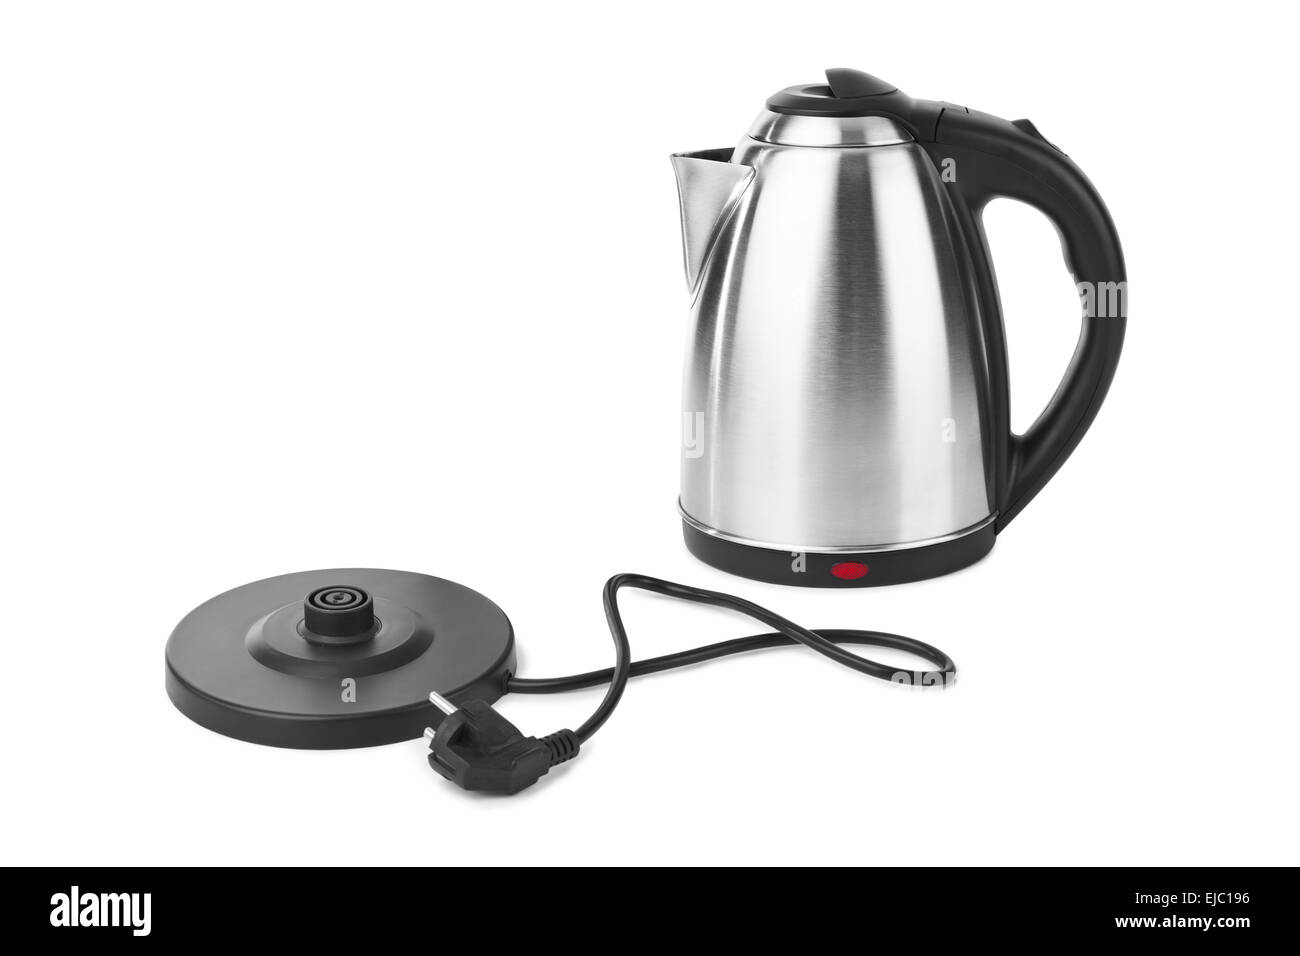 Electric kettle with stand isolated on white background. Electric cord with  plug Stock Photo - Alamy